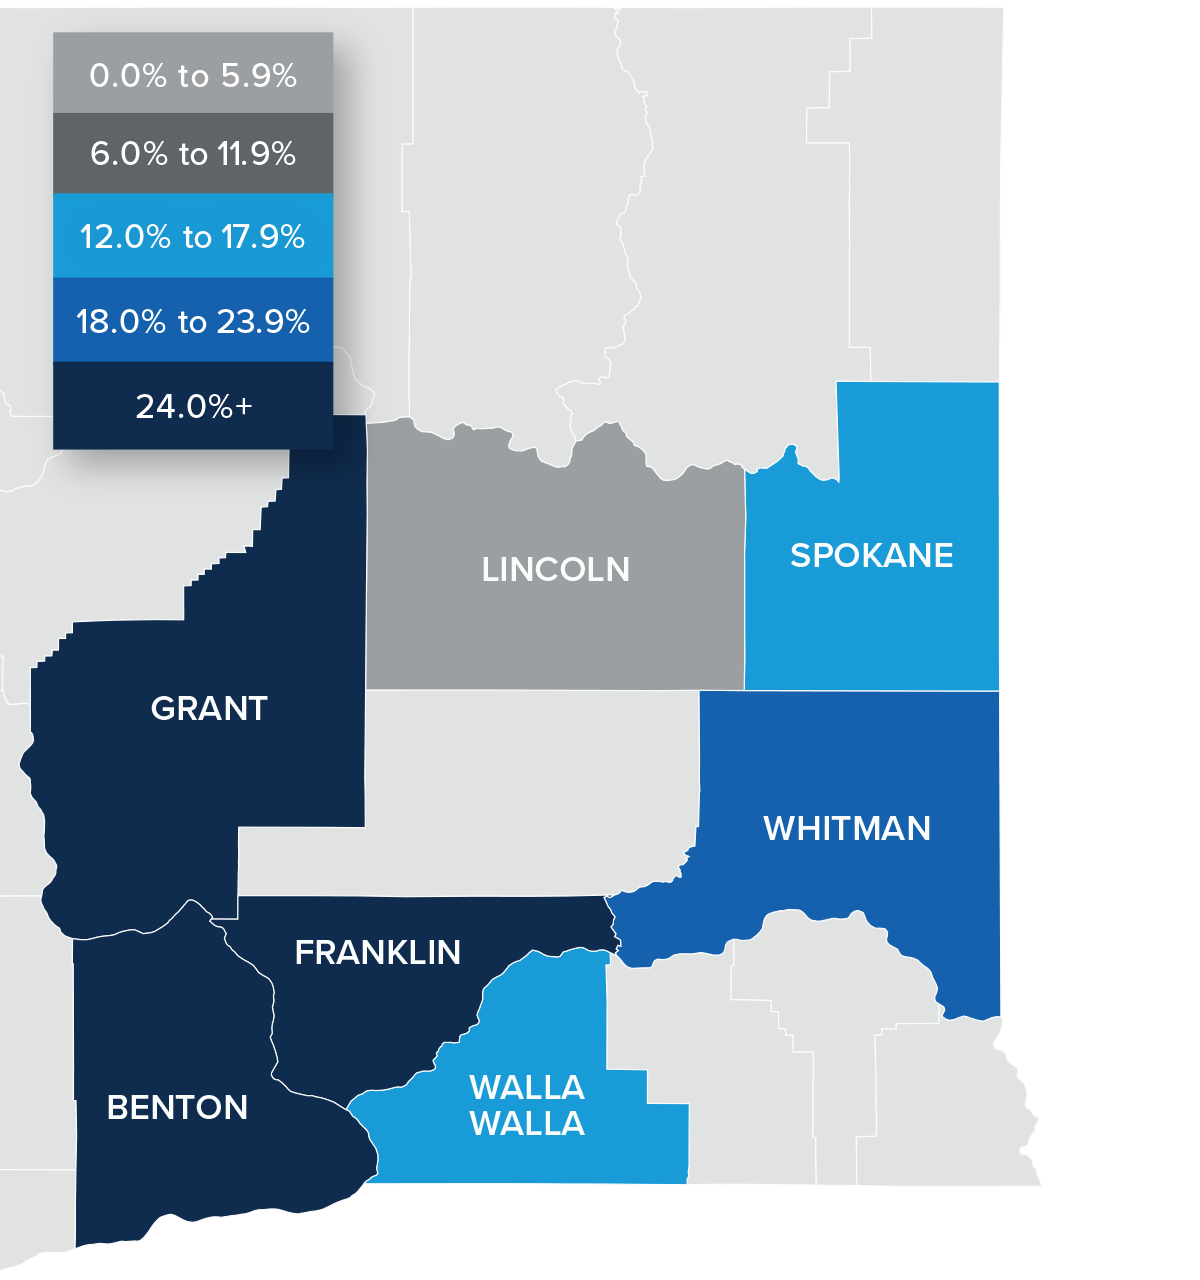 A map showing the year-over-year real estate market percentage changes in various counties in Eastern Washington for Q1 2022.